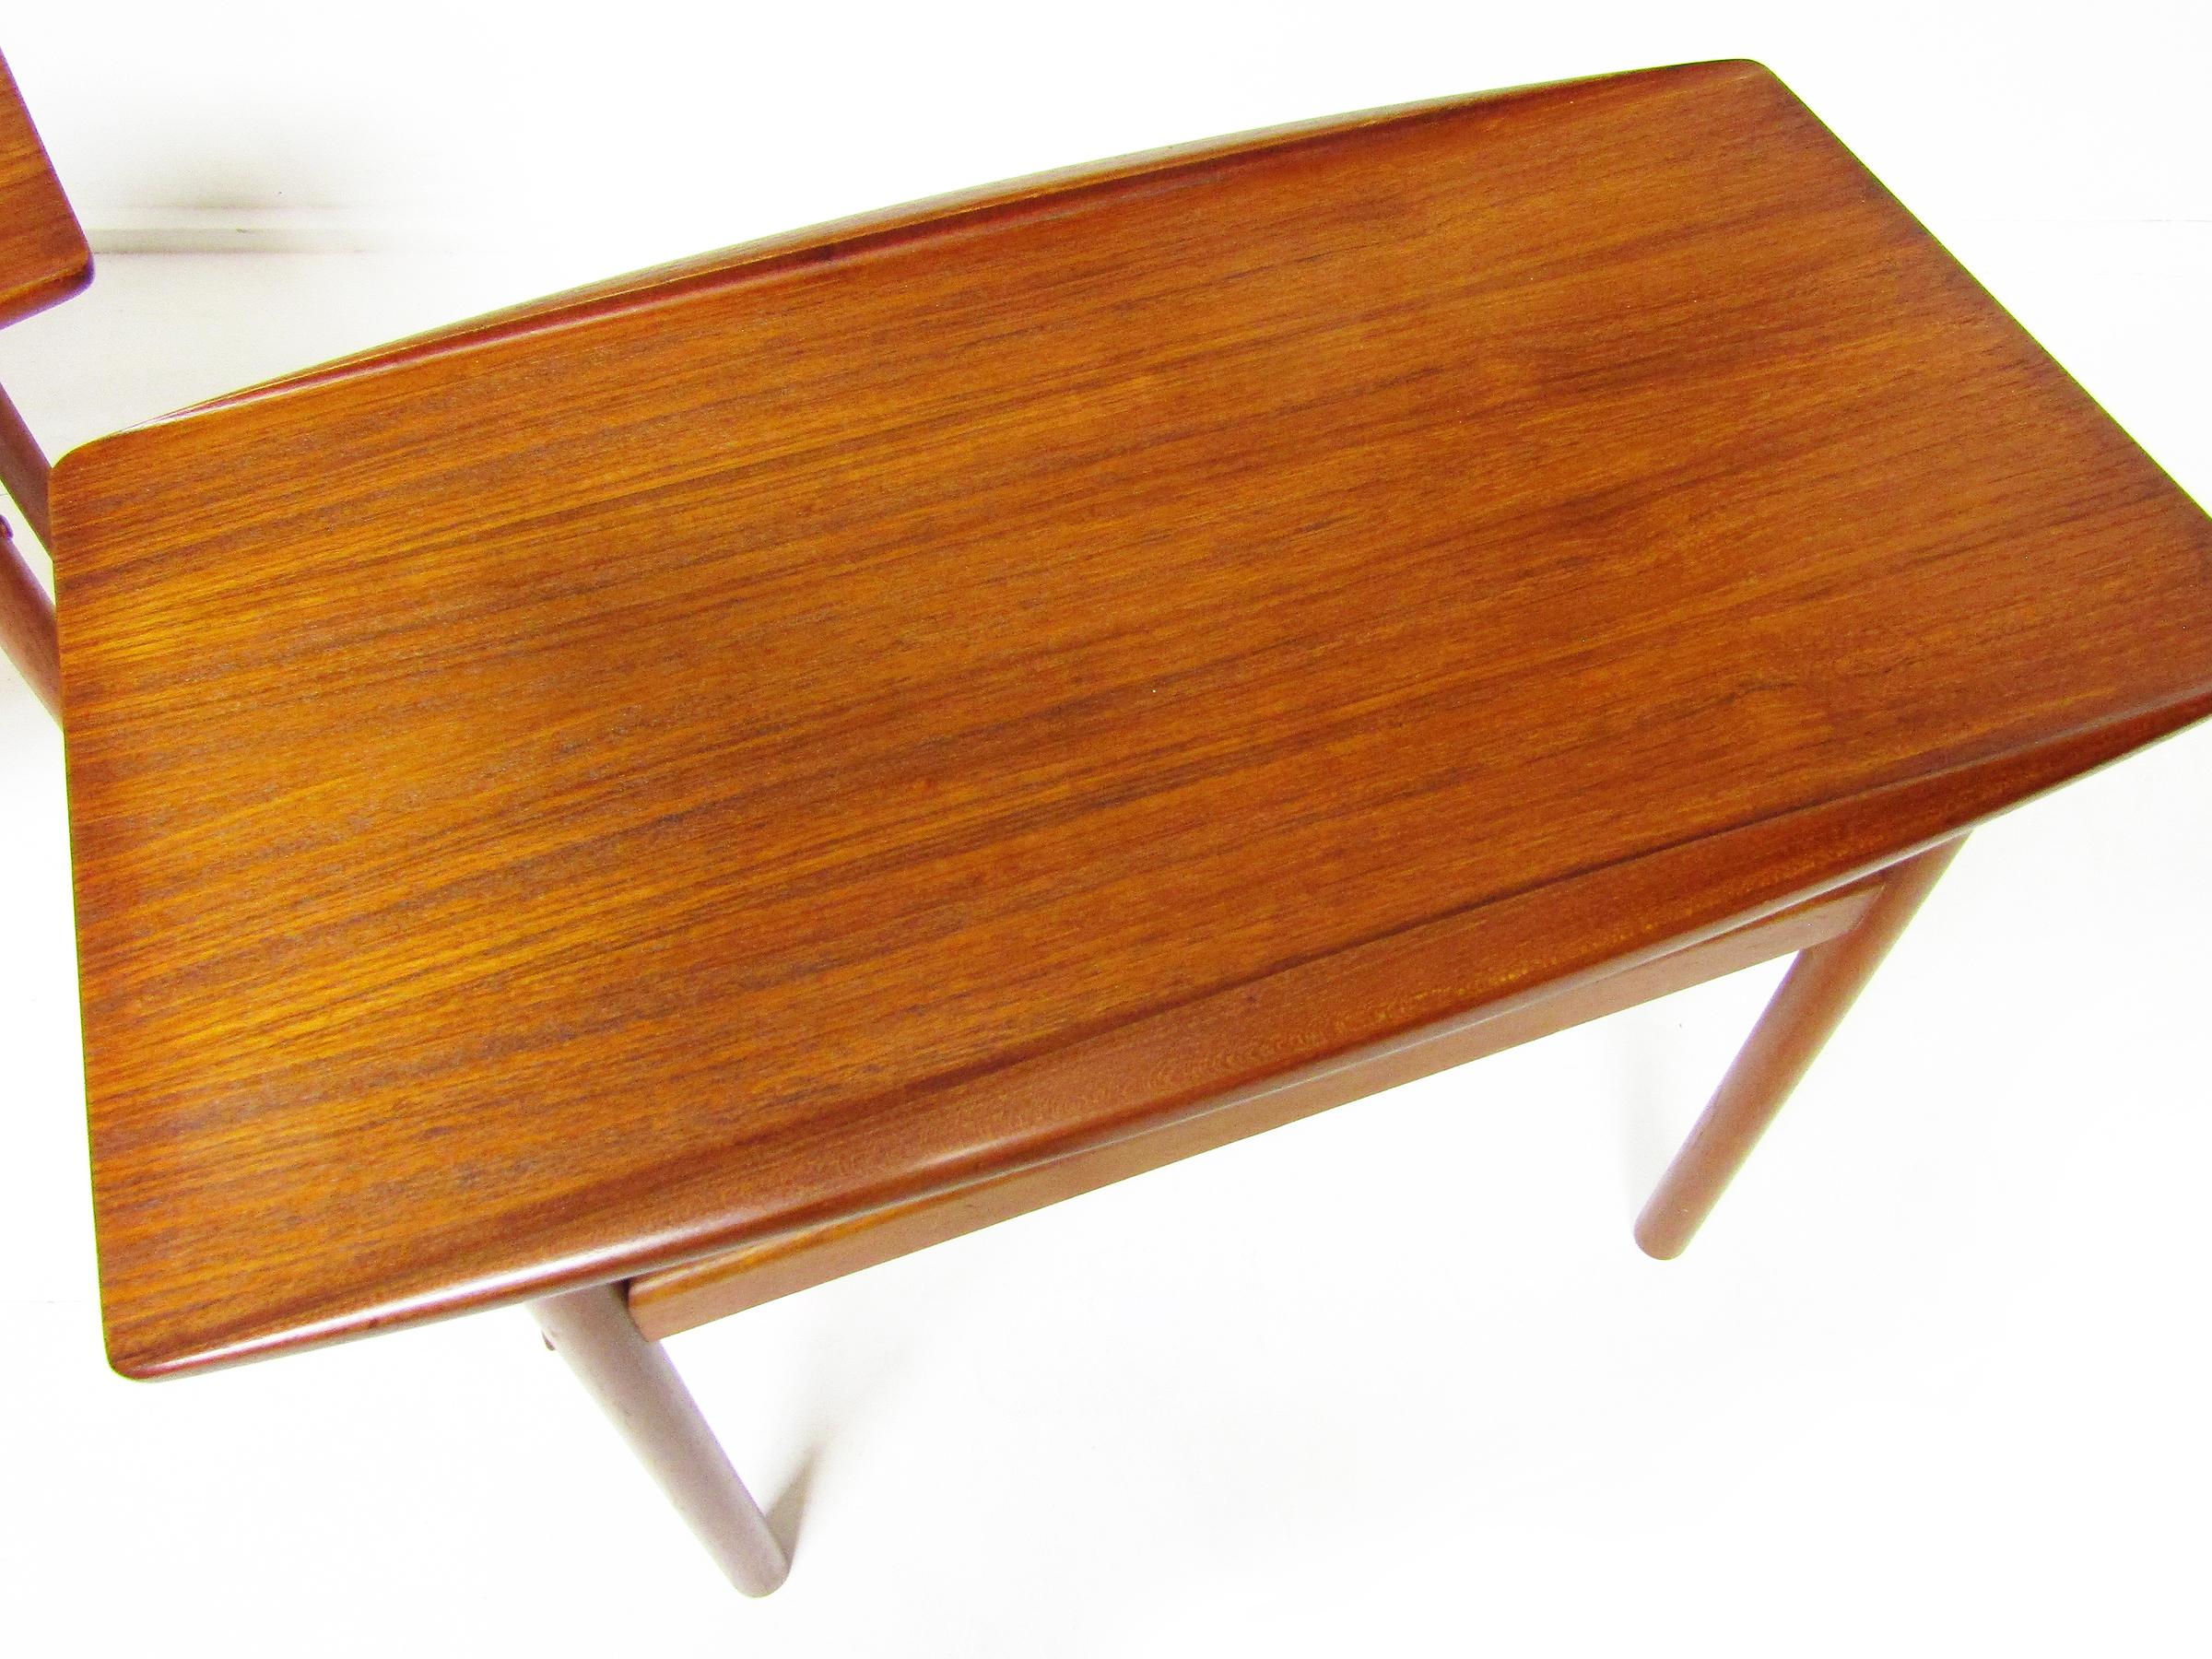 Pair Of Danish Surfboard Lamp Tables Or Night Stands In Teak By Grete Jalk For Sale 6